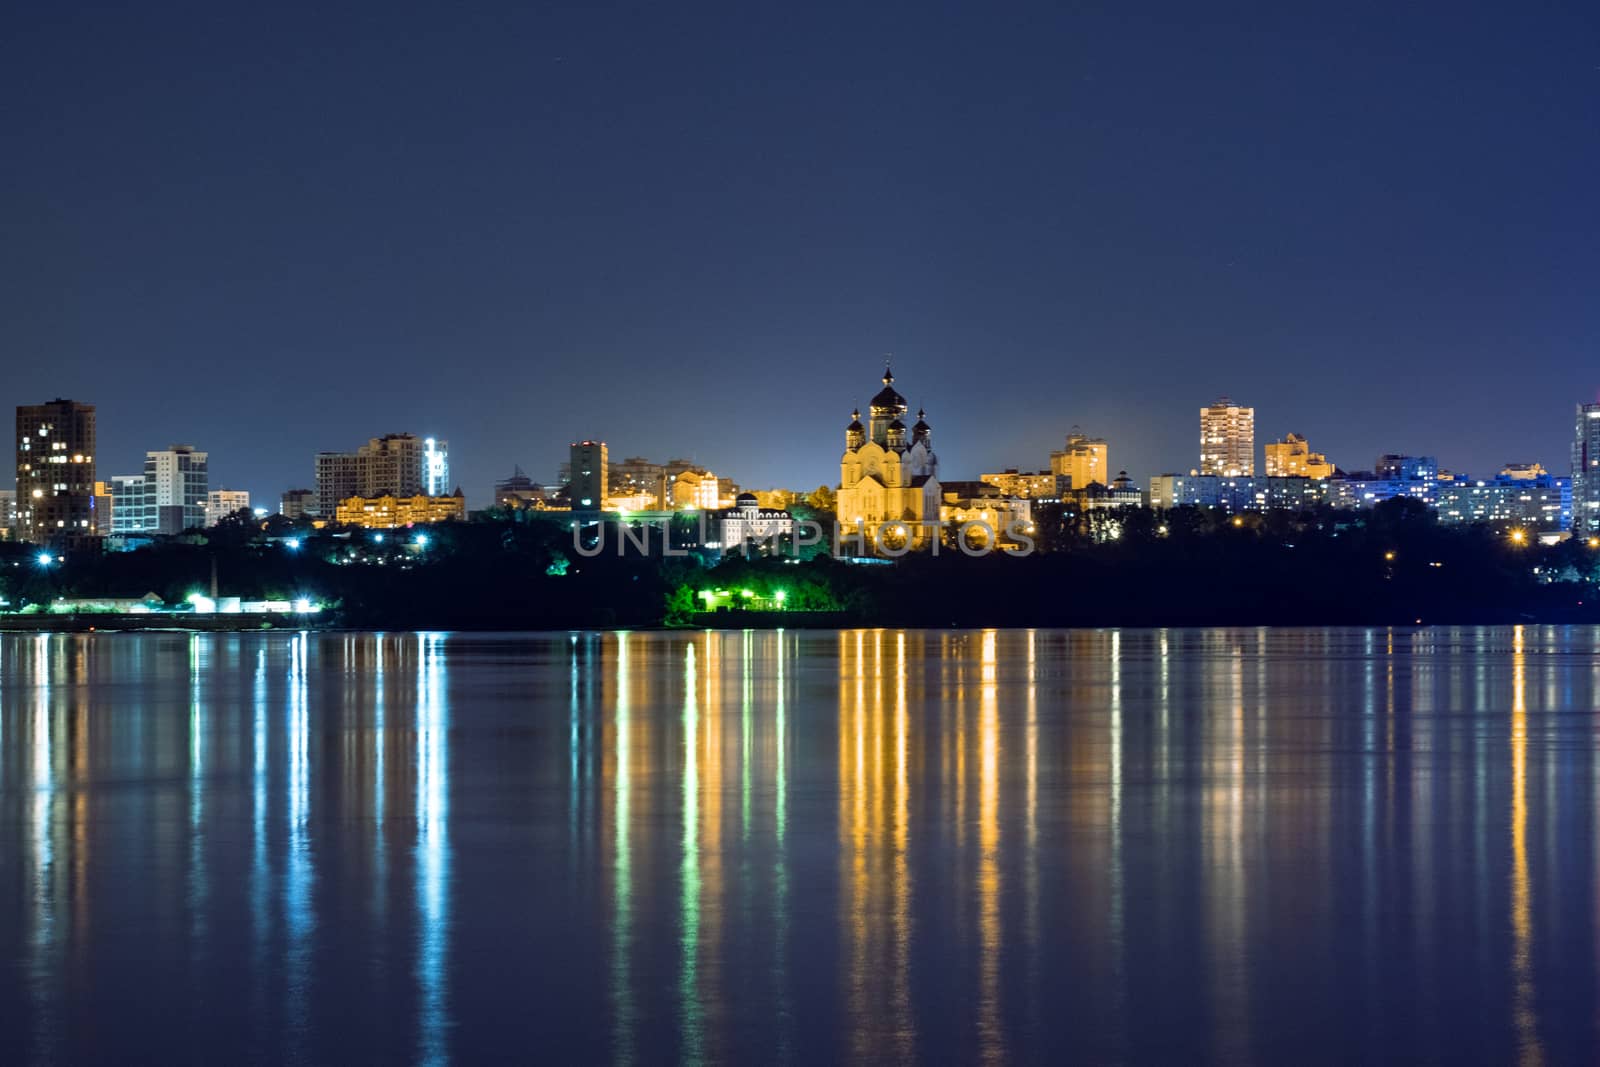 Night View of the city of Khabarovsk from the Amur river. Blue night sky. The night city is brightly lit with lanterns